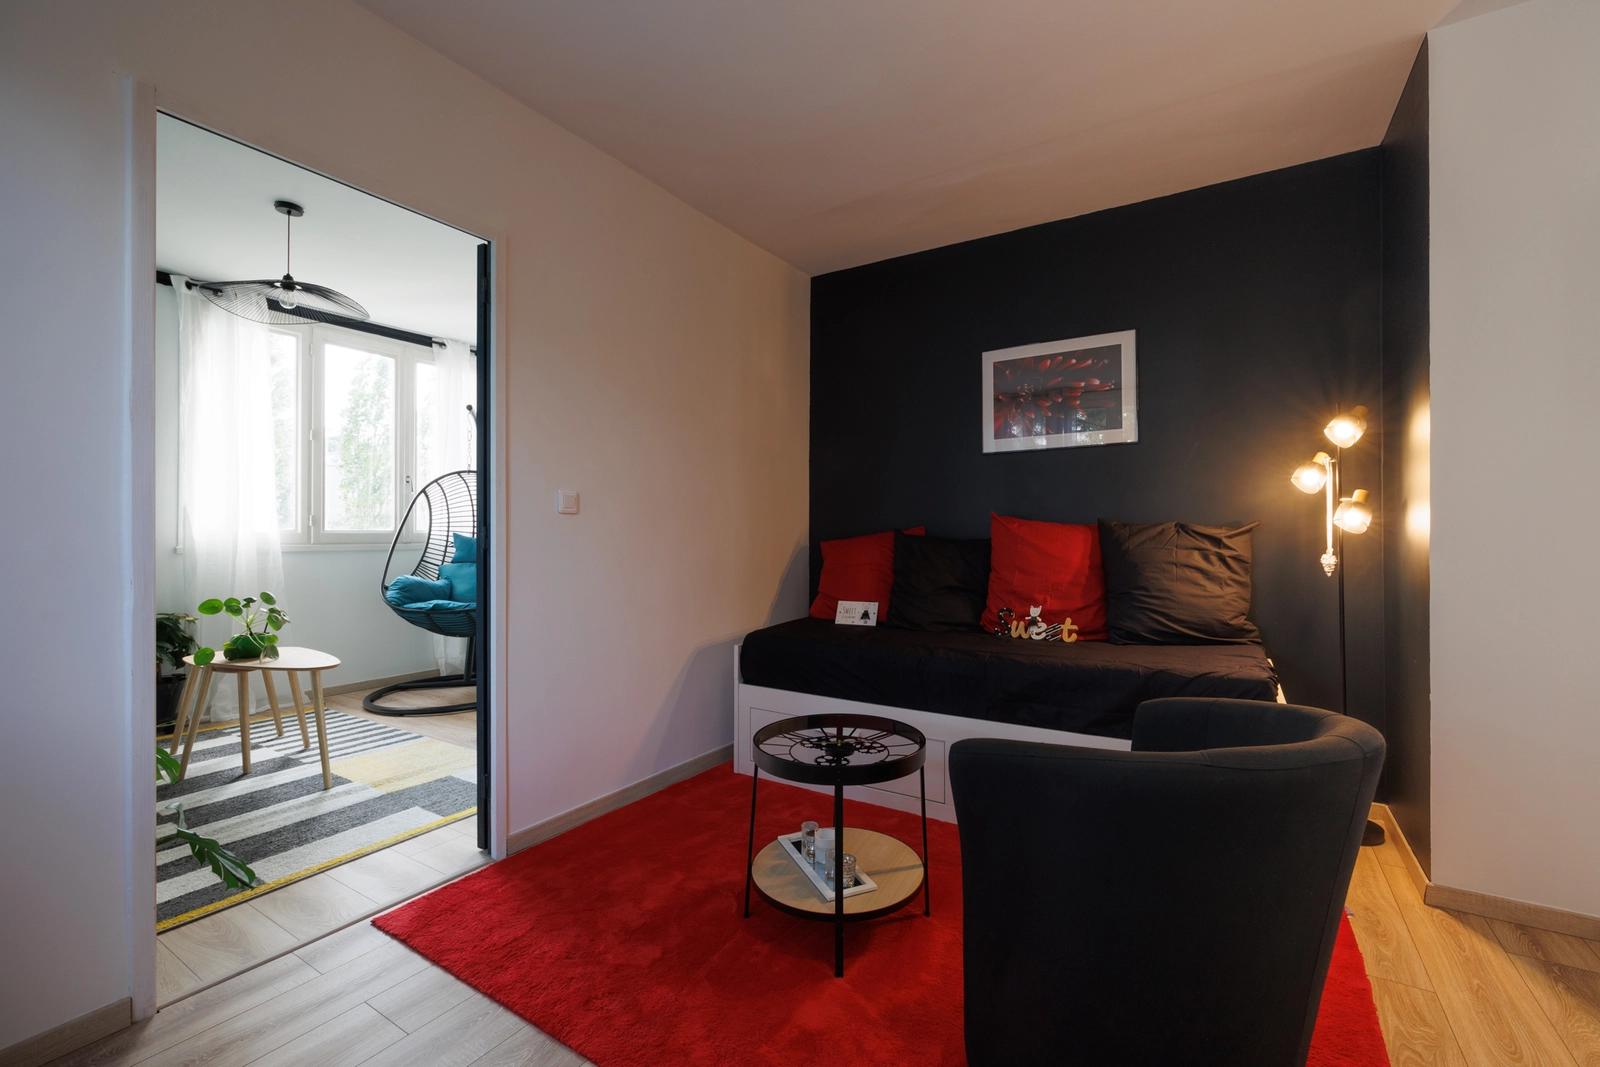 Space Modern 70 m2 apartment in western Lyon - 5